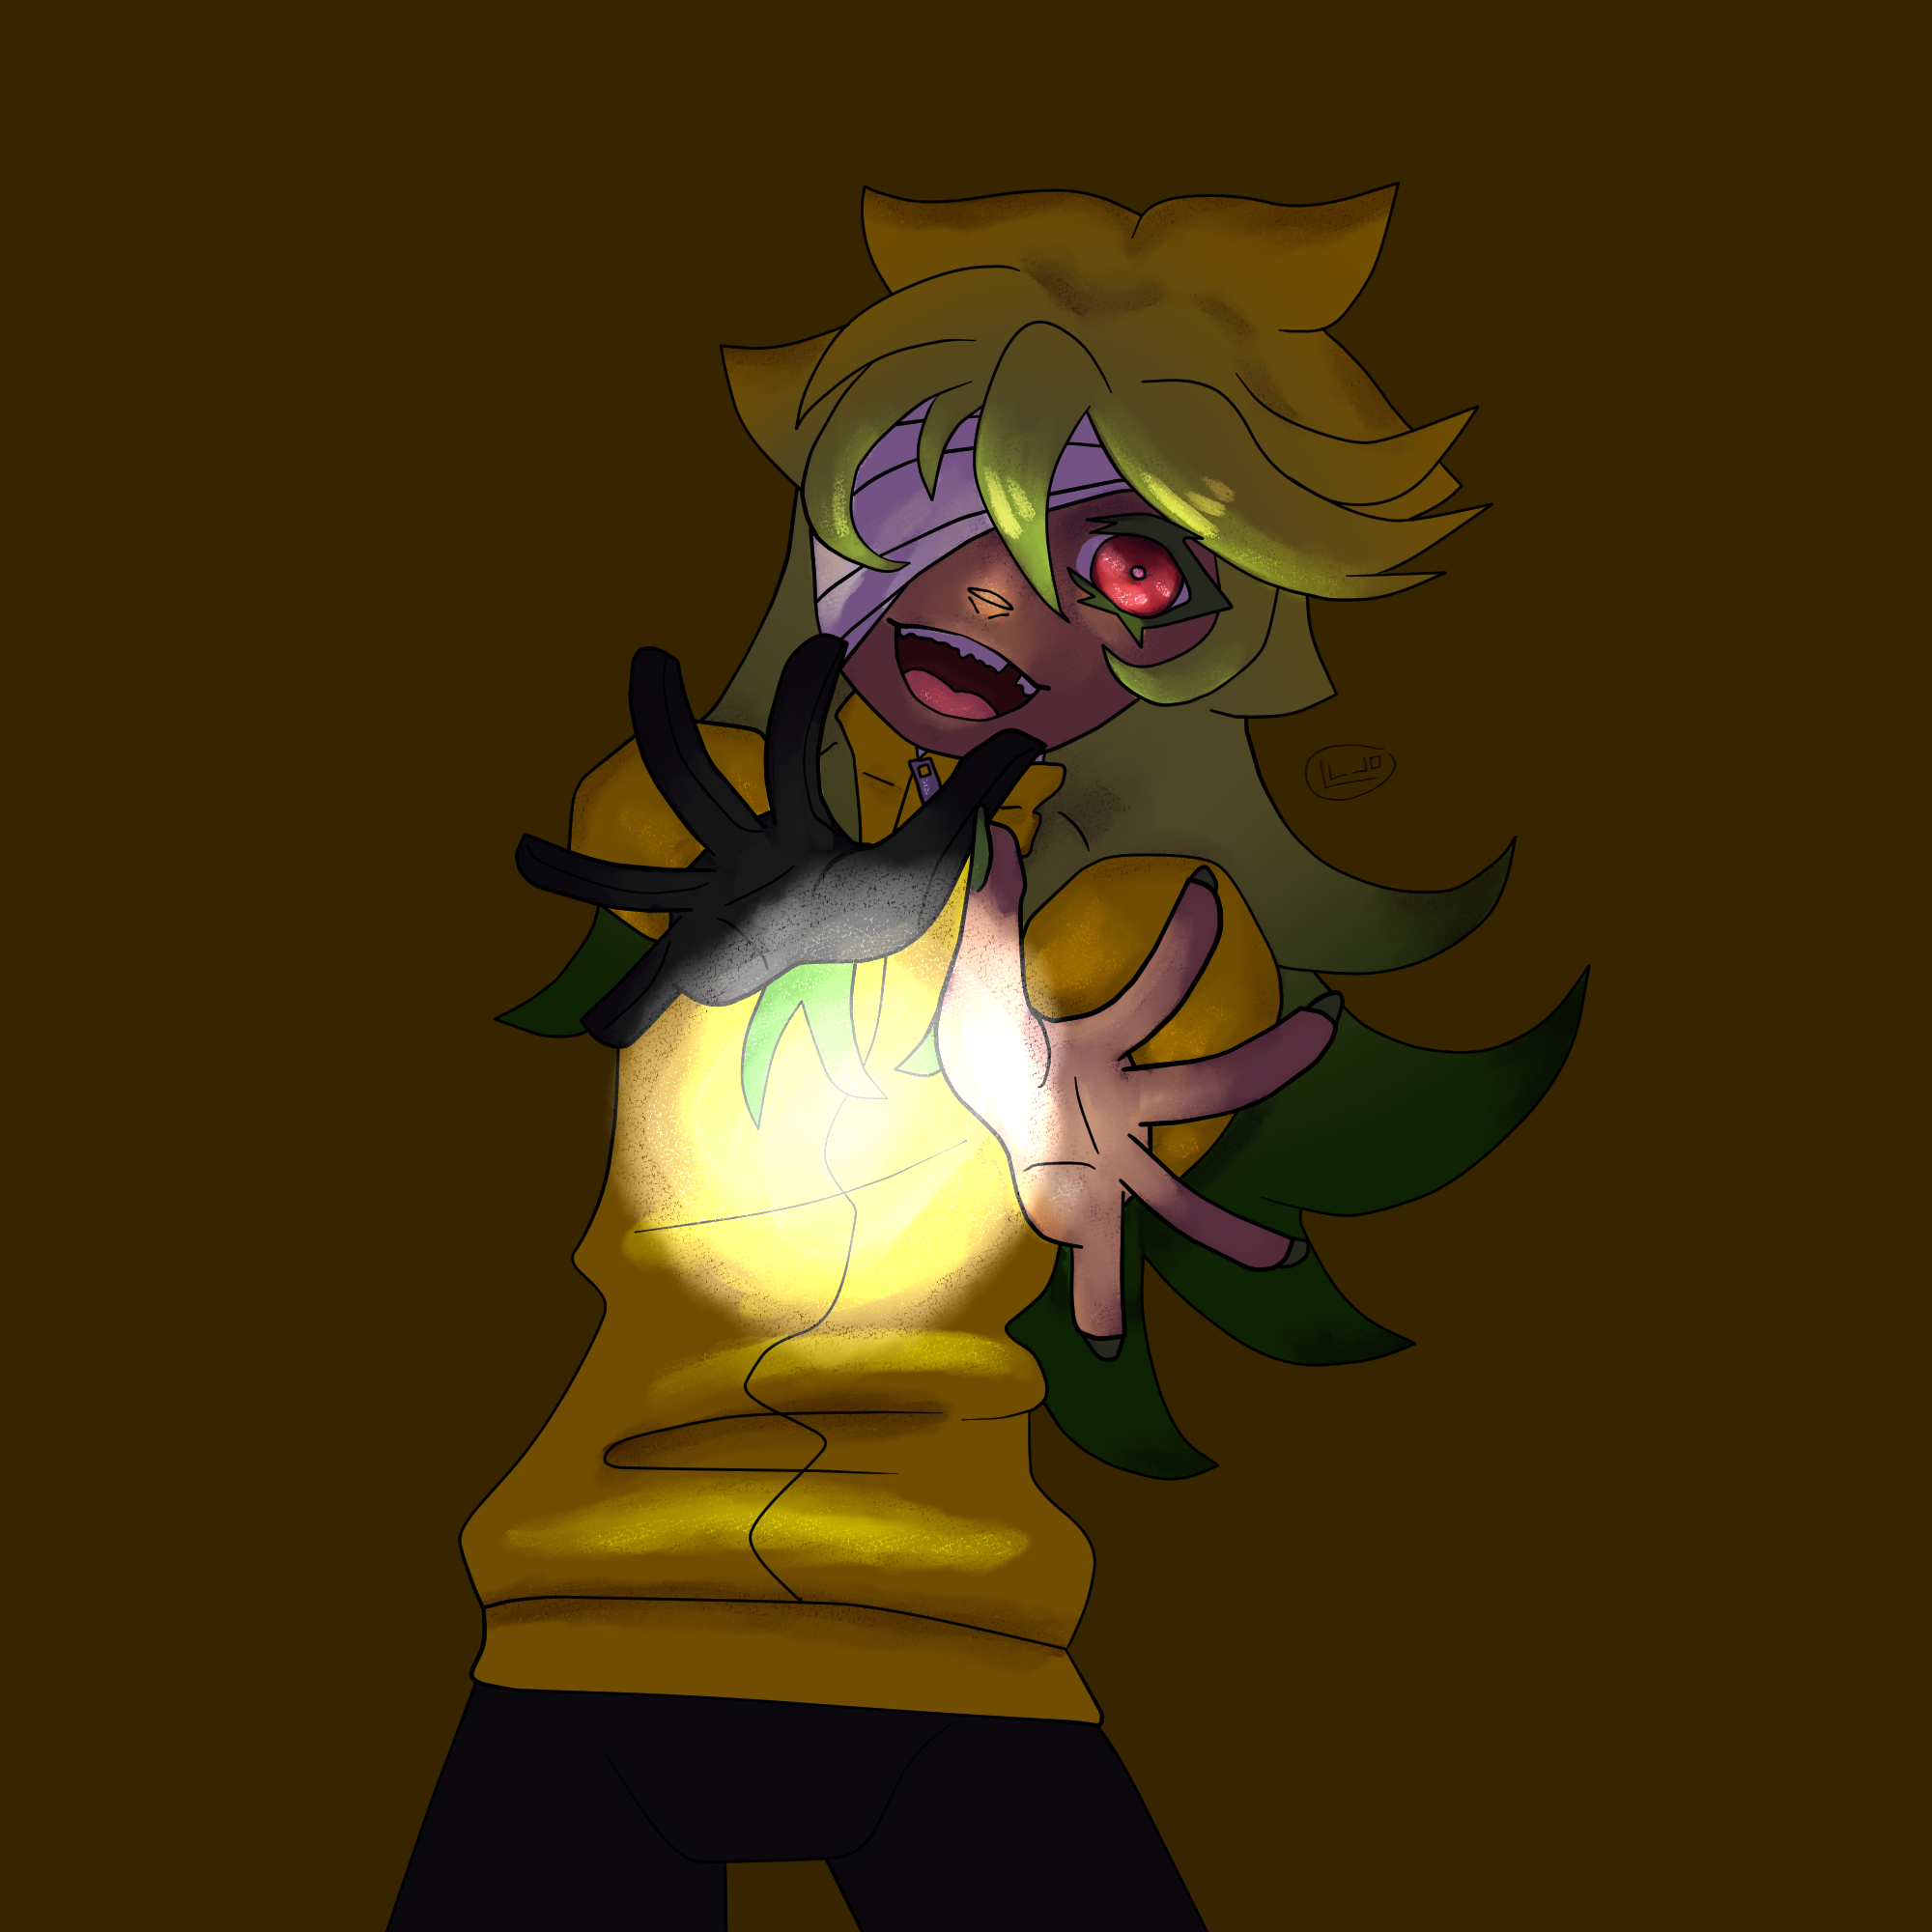 A drawing of Nico from Nanbaka aiming a ball of light at the viewer